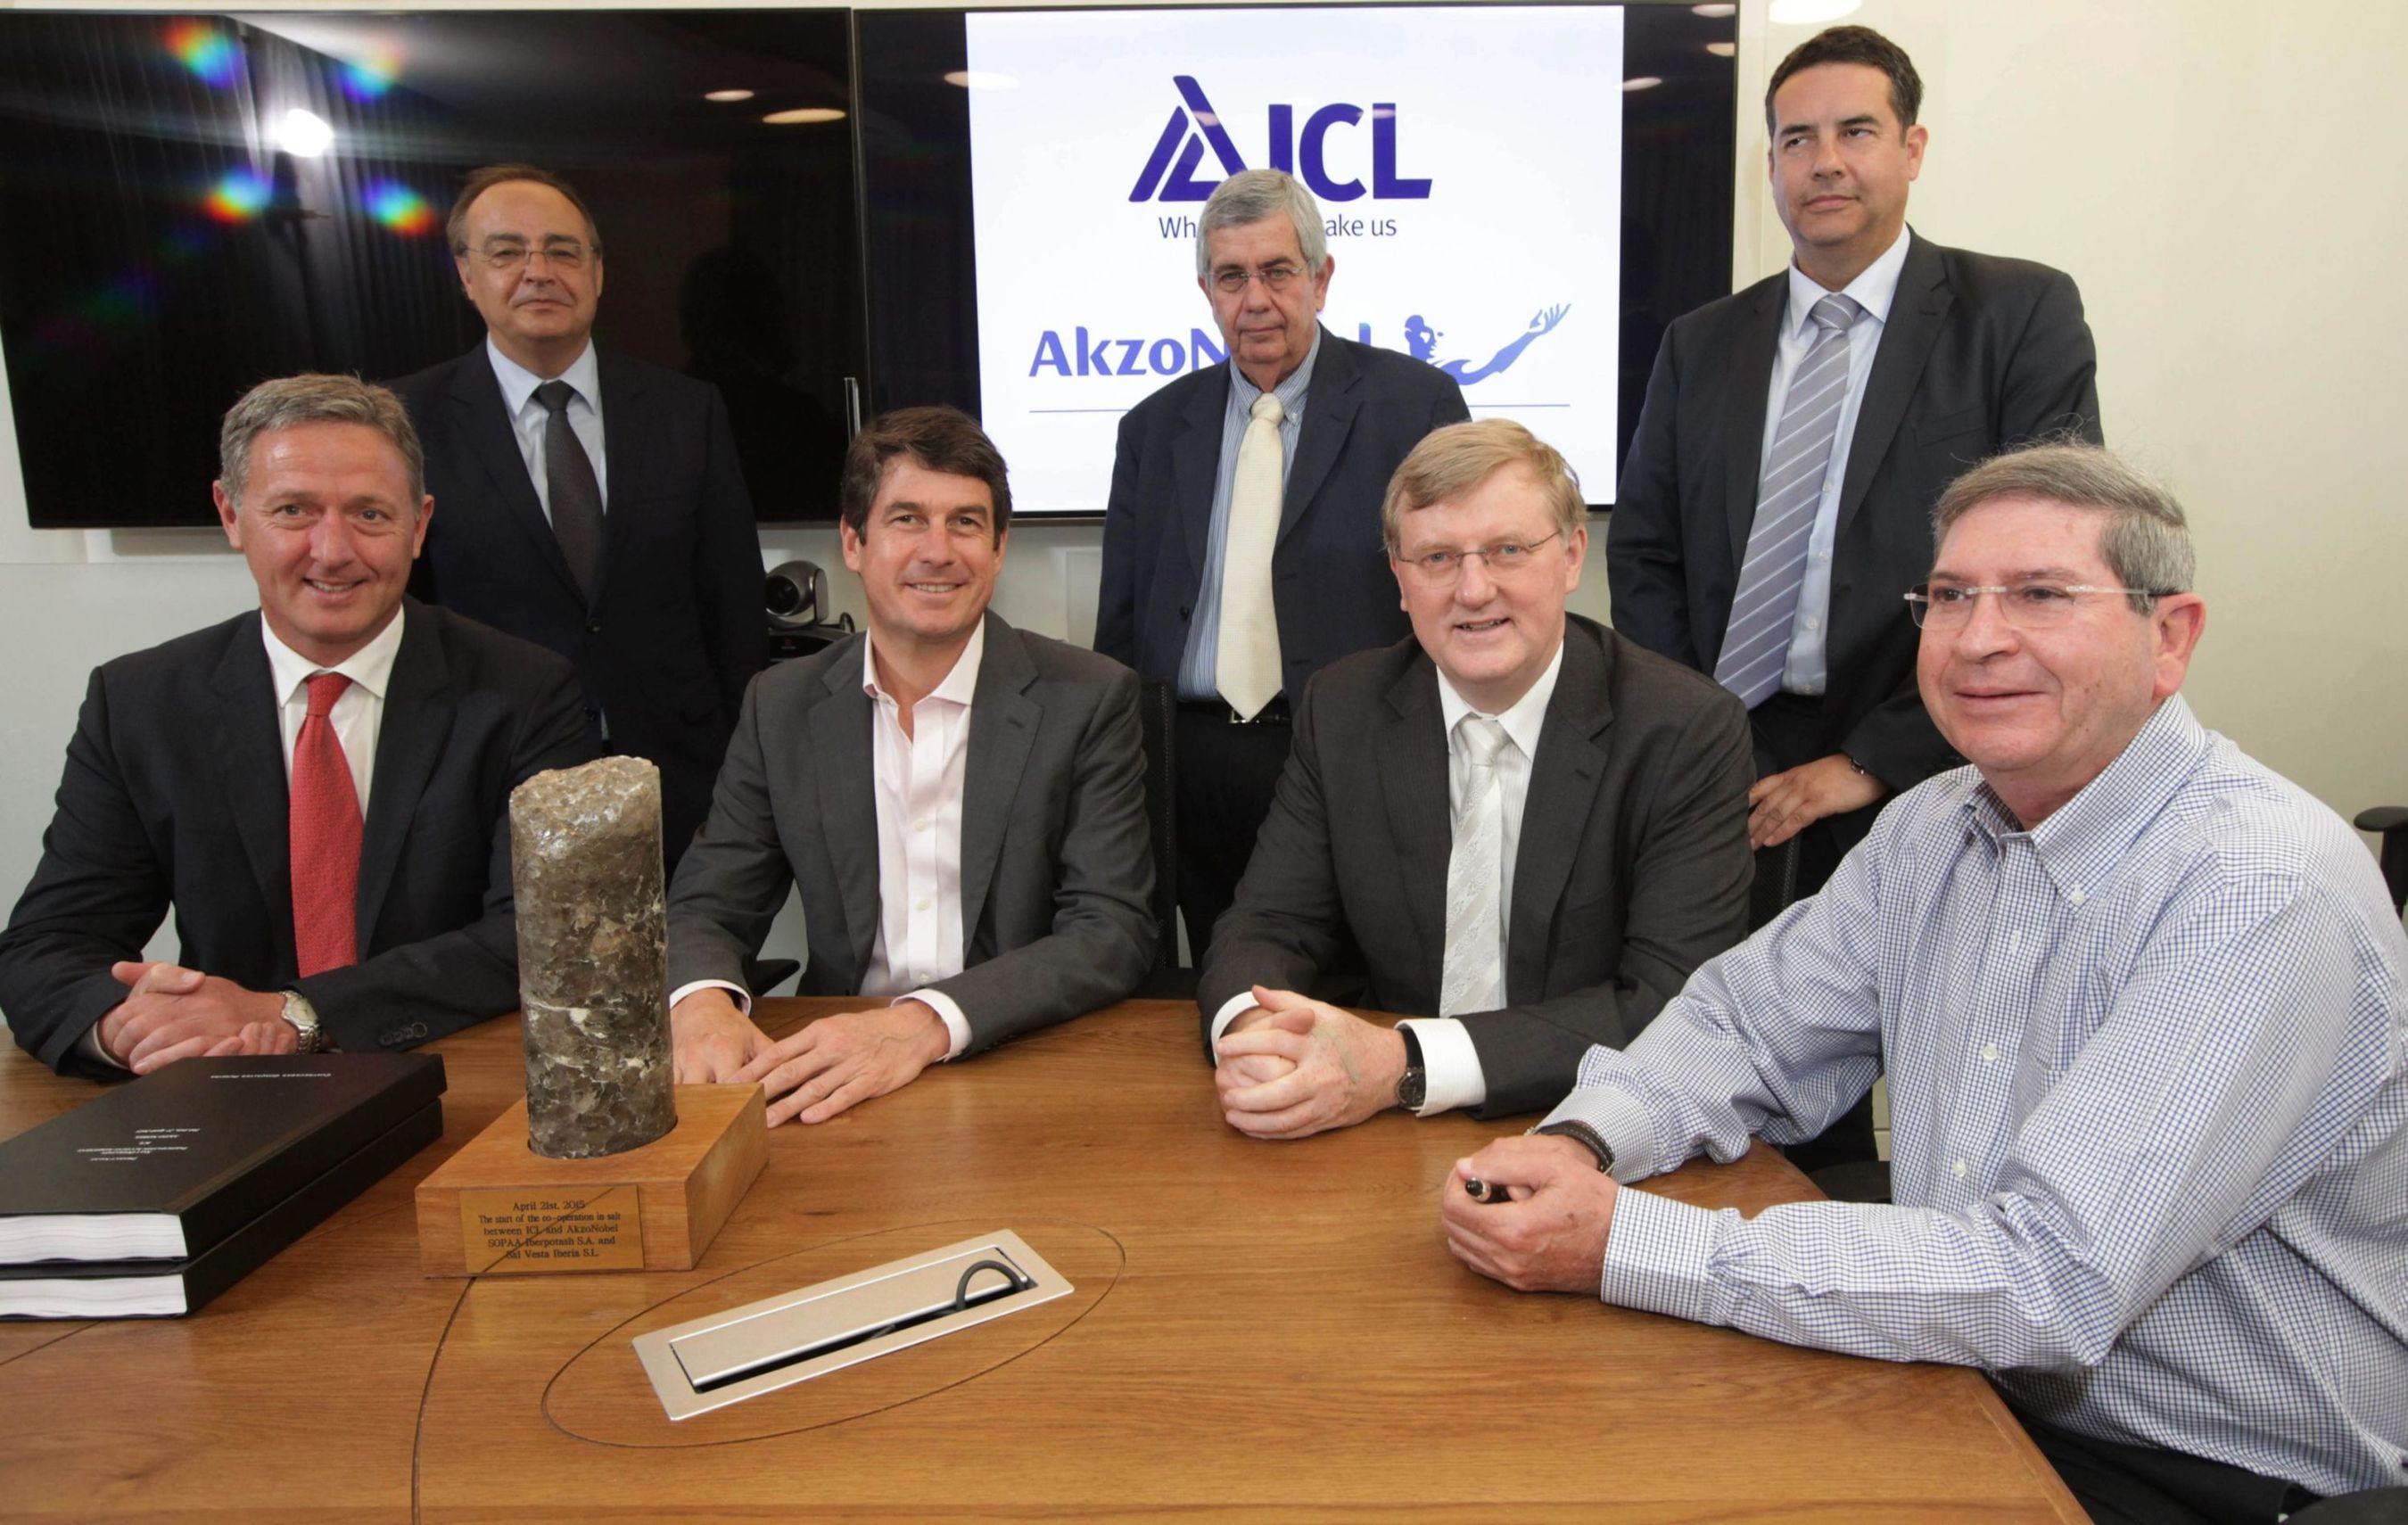 In the photo at the signing of the agreement, from right to left: Standing: Carles Aleman- ICL Iberia Salt Business Unit Director, Isaac Goldstein -ICL SVP Marketing & Sales Europe, Jose Antonio Martinez Alamo - Chairman of ICL Europe & Executive President of ICL Iberia. Sitting: Nissim Adar- ICL Fertilizers CEO, Knut Schwalenberg- Akzo Nobel President, Stefan Borgas, CEO, ICL, Nils C. Van der Plas - Executive Vice President & General Manager Salt & DME Akzo Nobel. (PRNewsFoto/ICL)